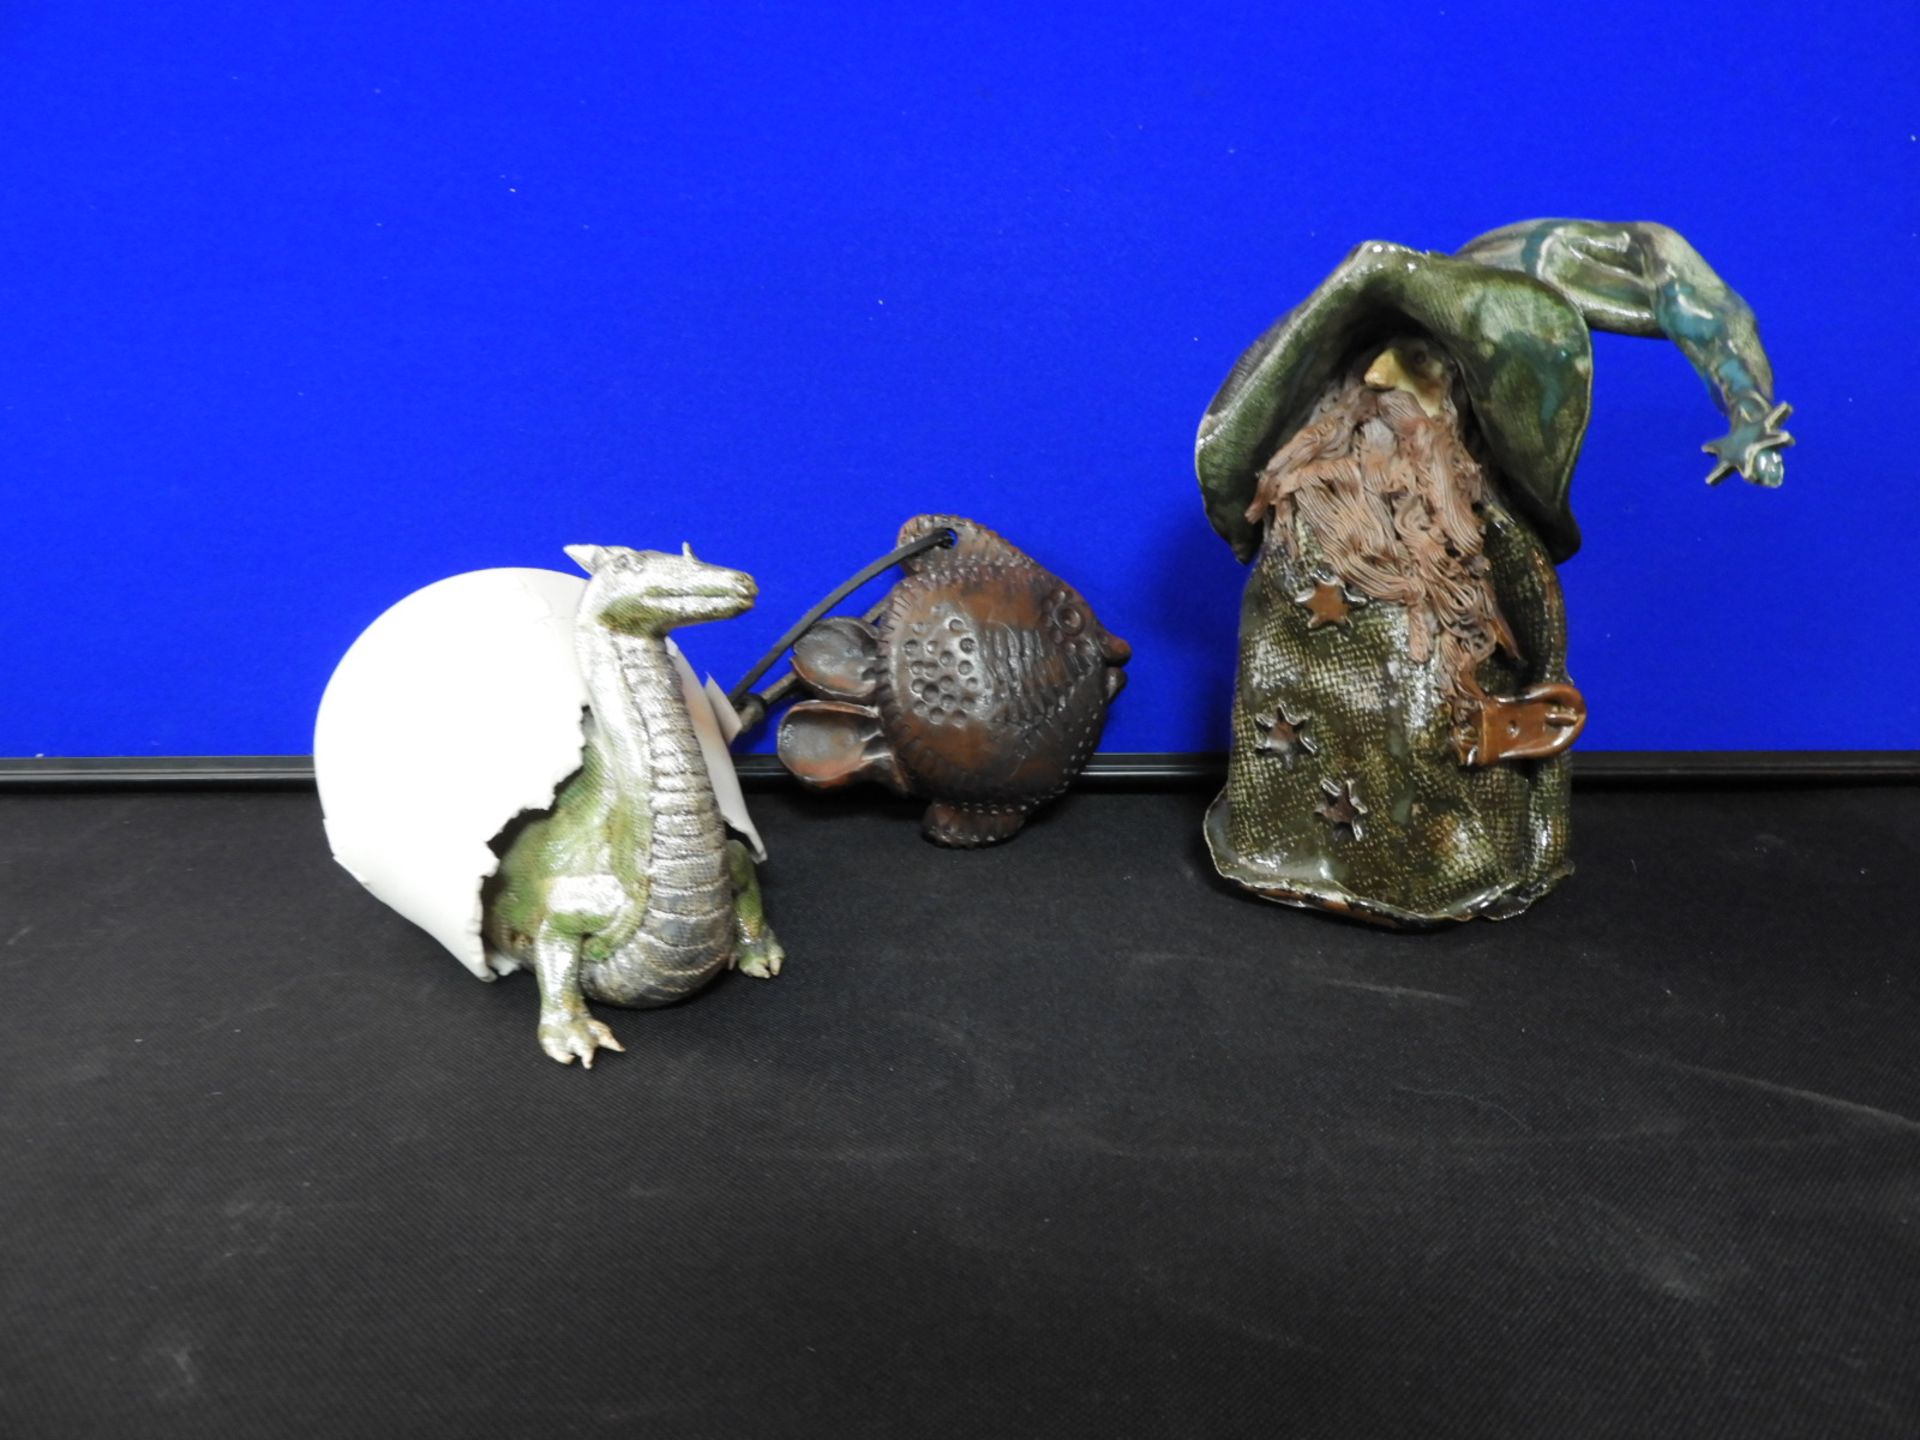 Dragon, Wizard and a Fish Pottery Ornaments